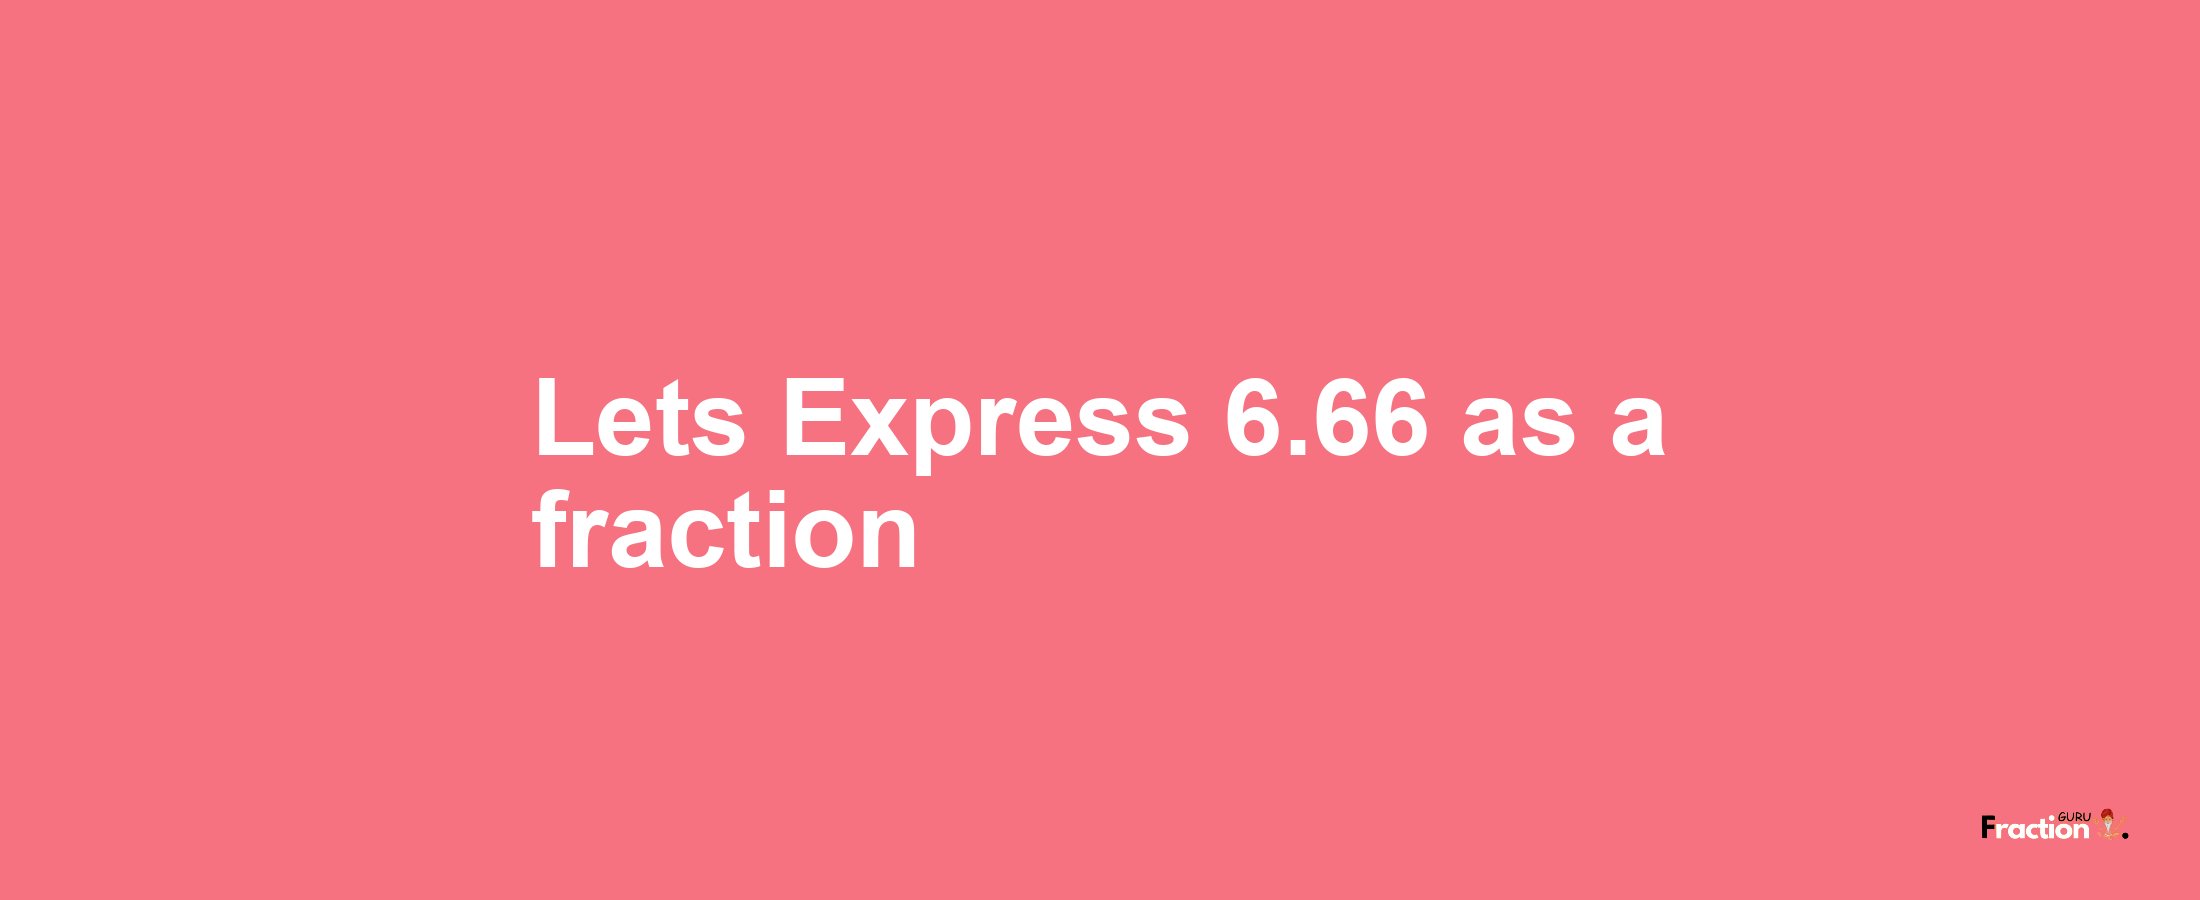 Lets Express 6.66 as afraction